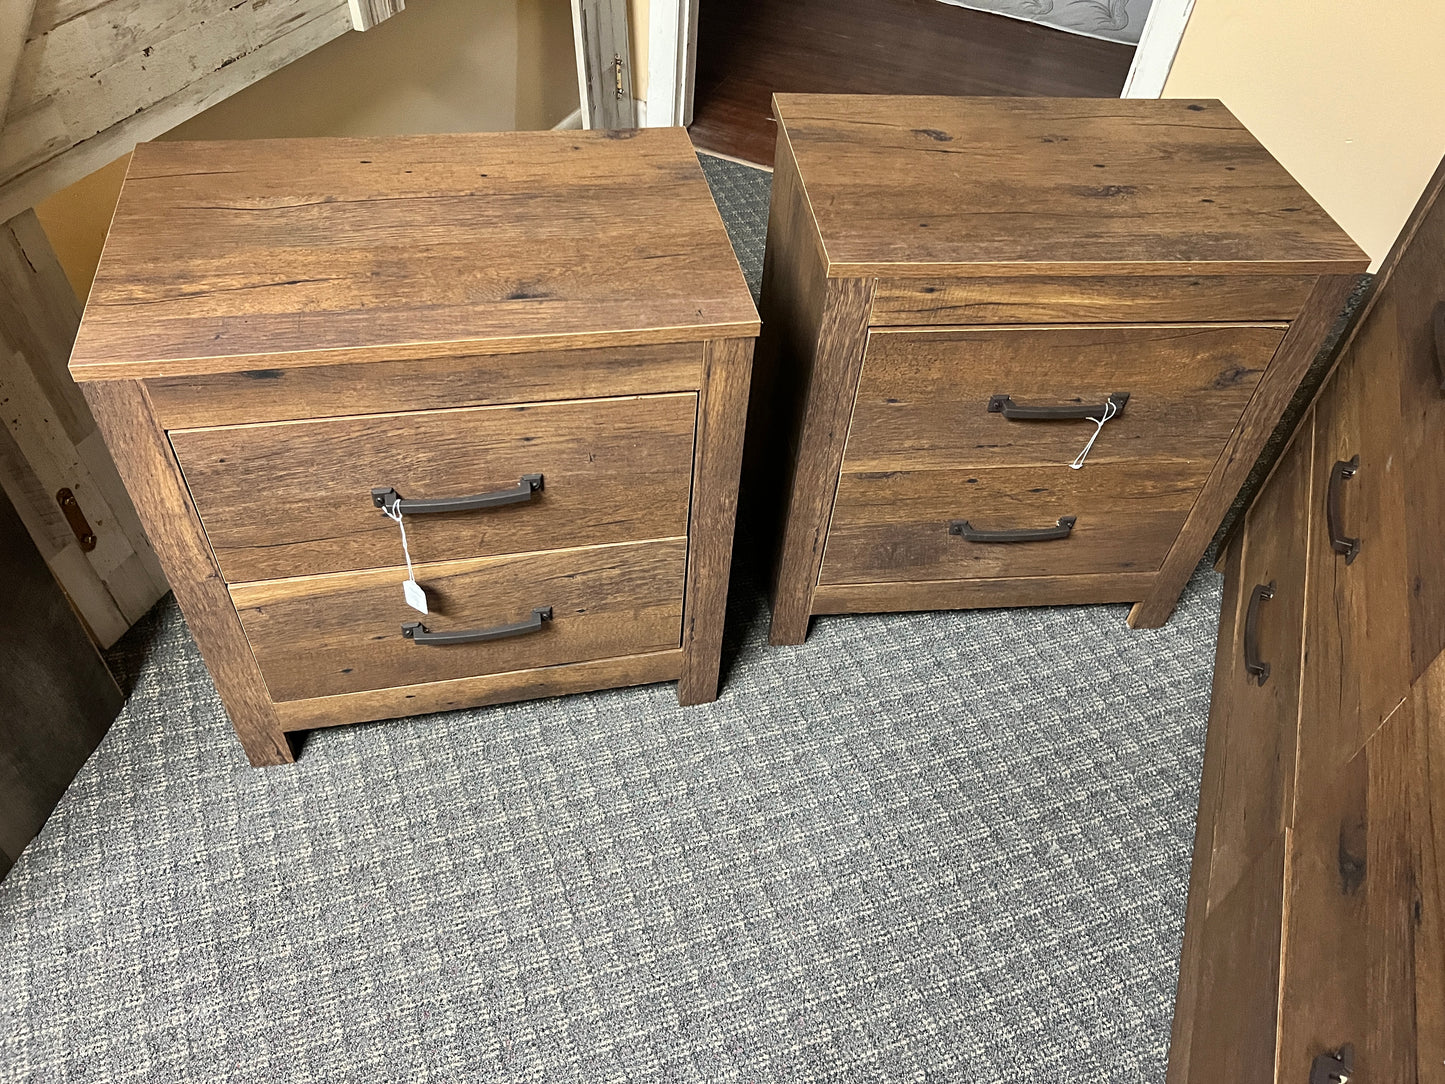 Brand new, Made in USA, pre-assembled, Rustic 4 piece bedroom set. Set comes with dresser, chest and both night stands